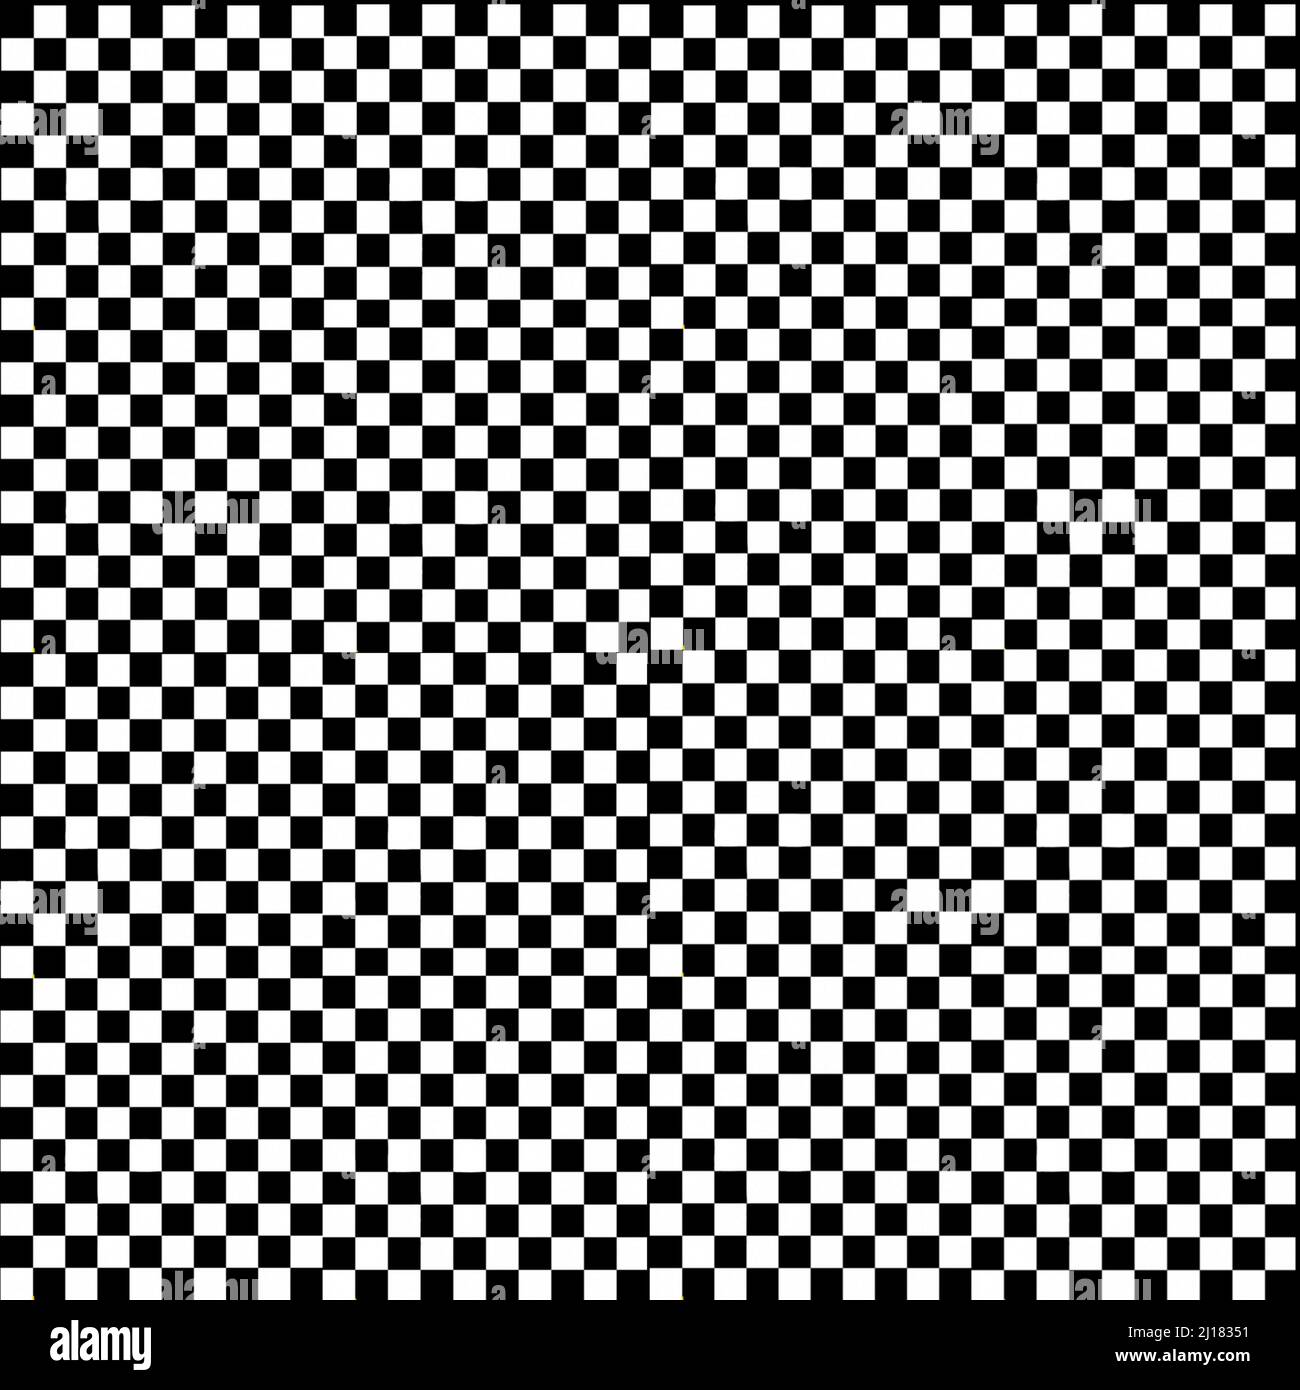 A seamless black and white squares in a checkerboard pattern Stock Photo